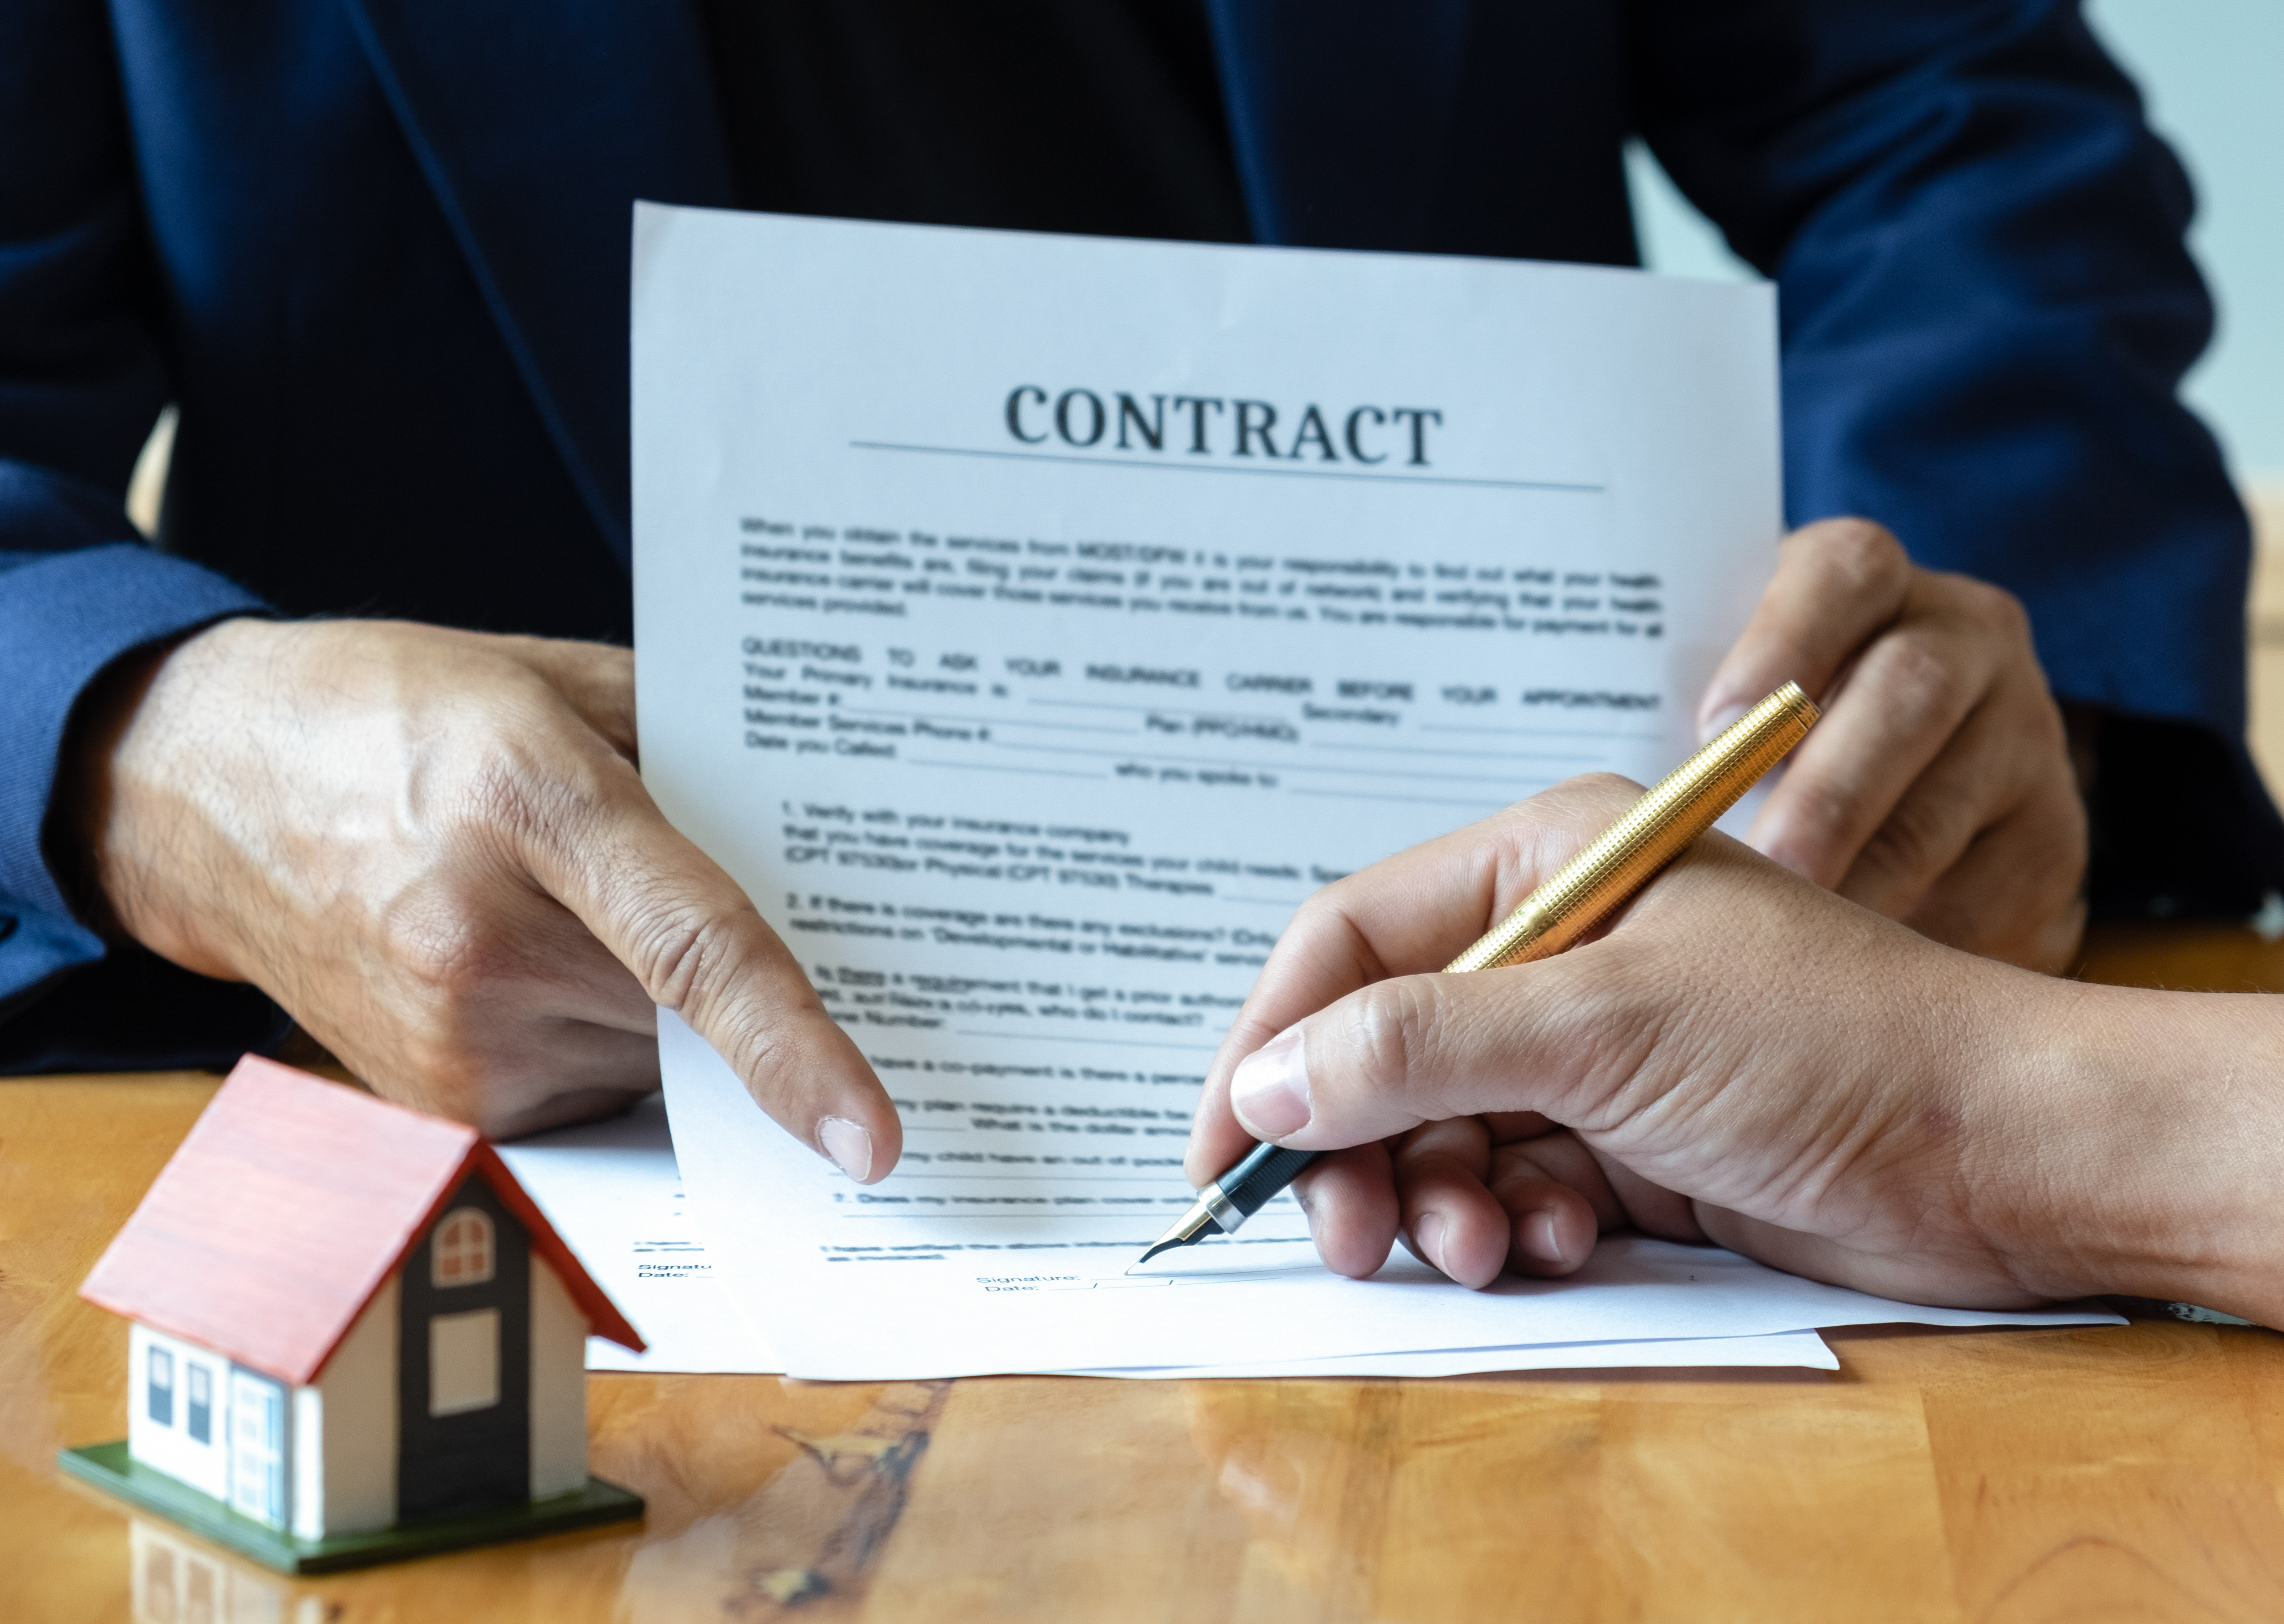 Signing a contract for a home.